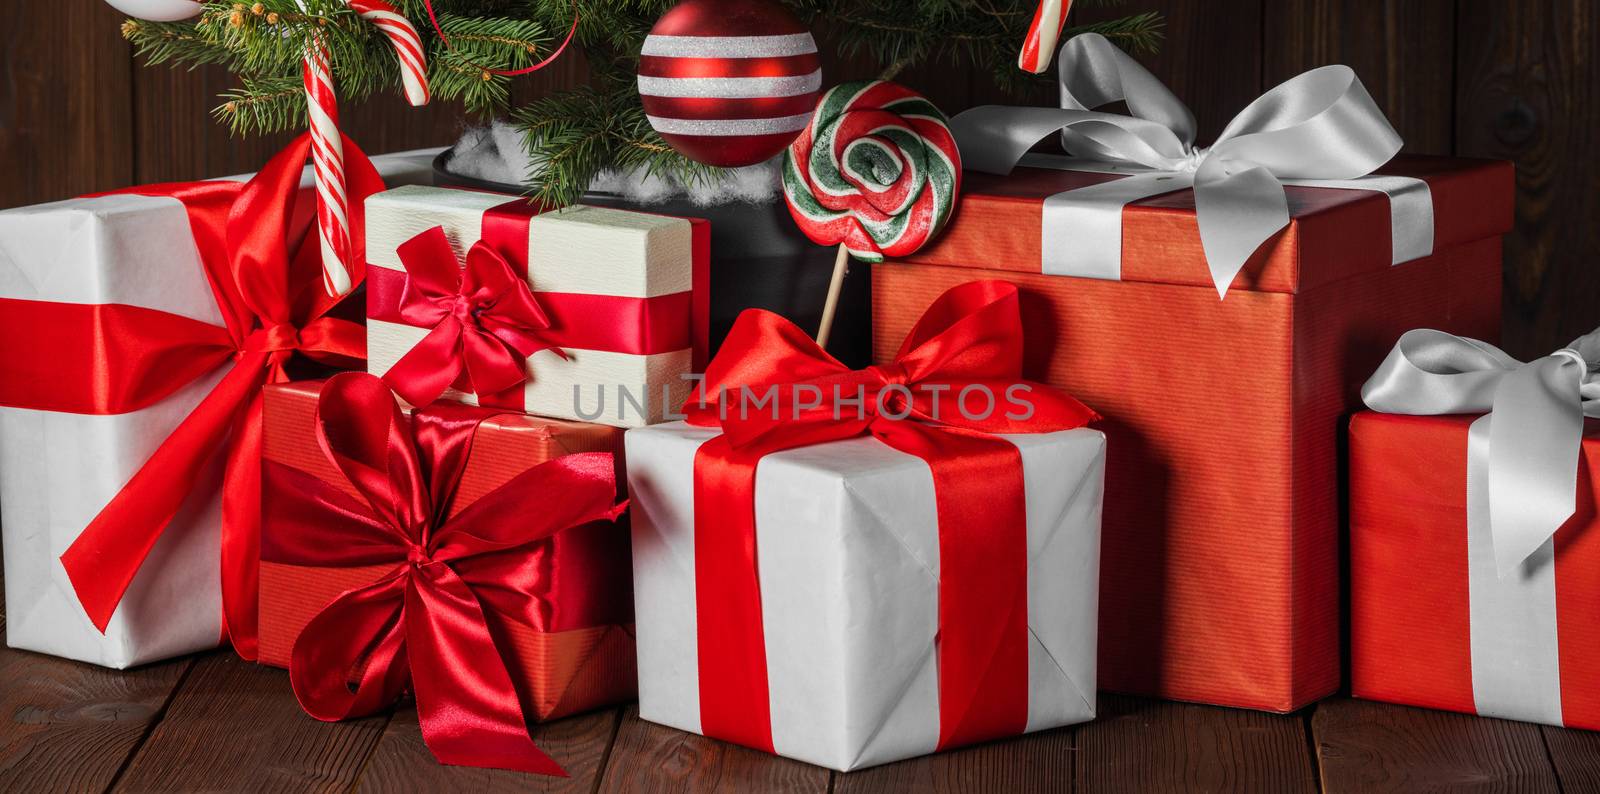 Decorated Christmas gifts under tree with candy canes and striped baubles